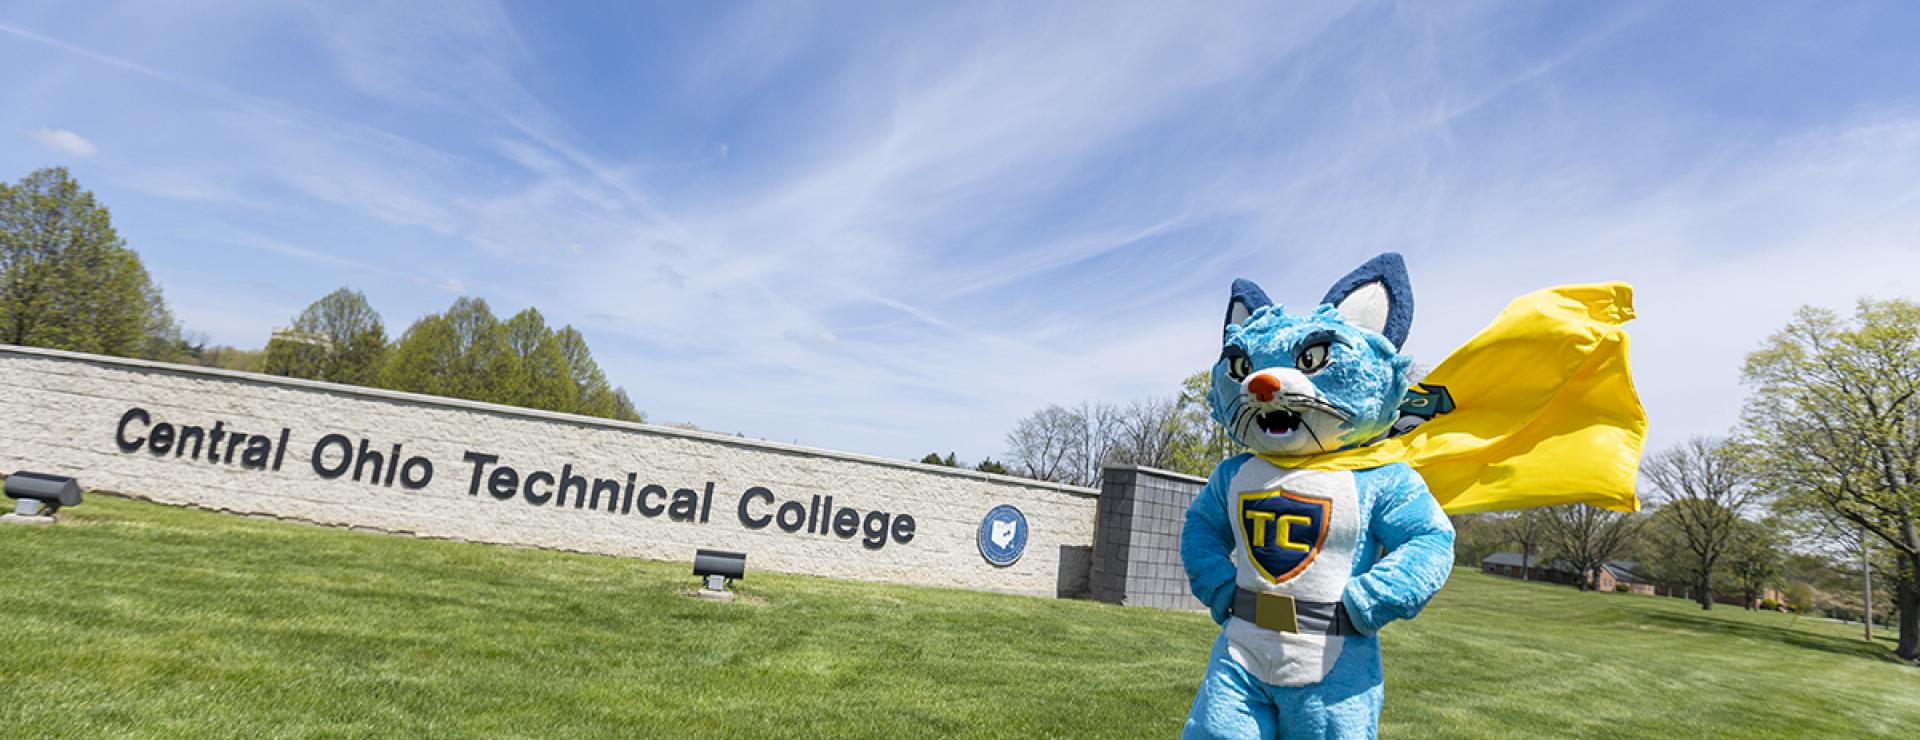 A person in a blue cat  costume with TC on his chest stands on campus with yellow cape blowing in the wind.